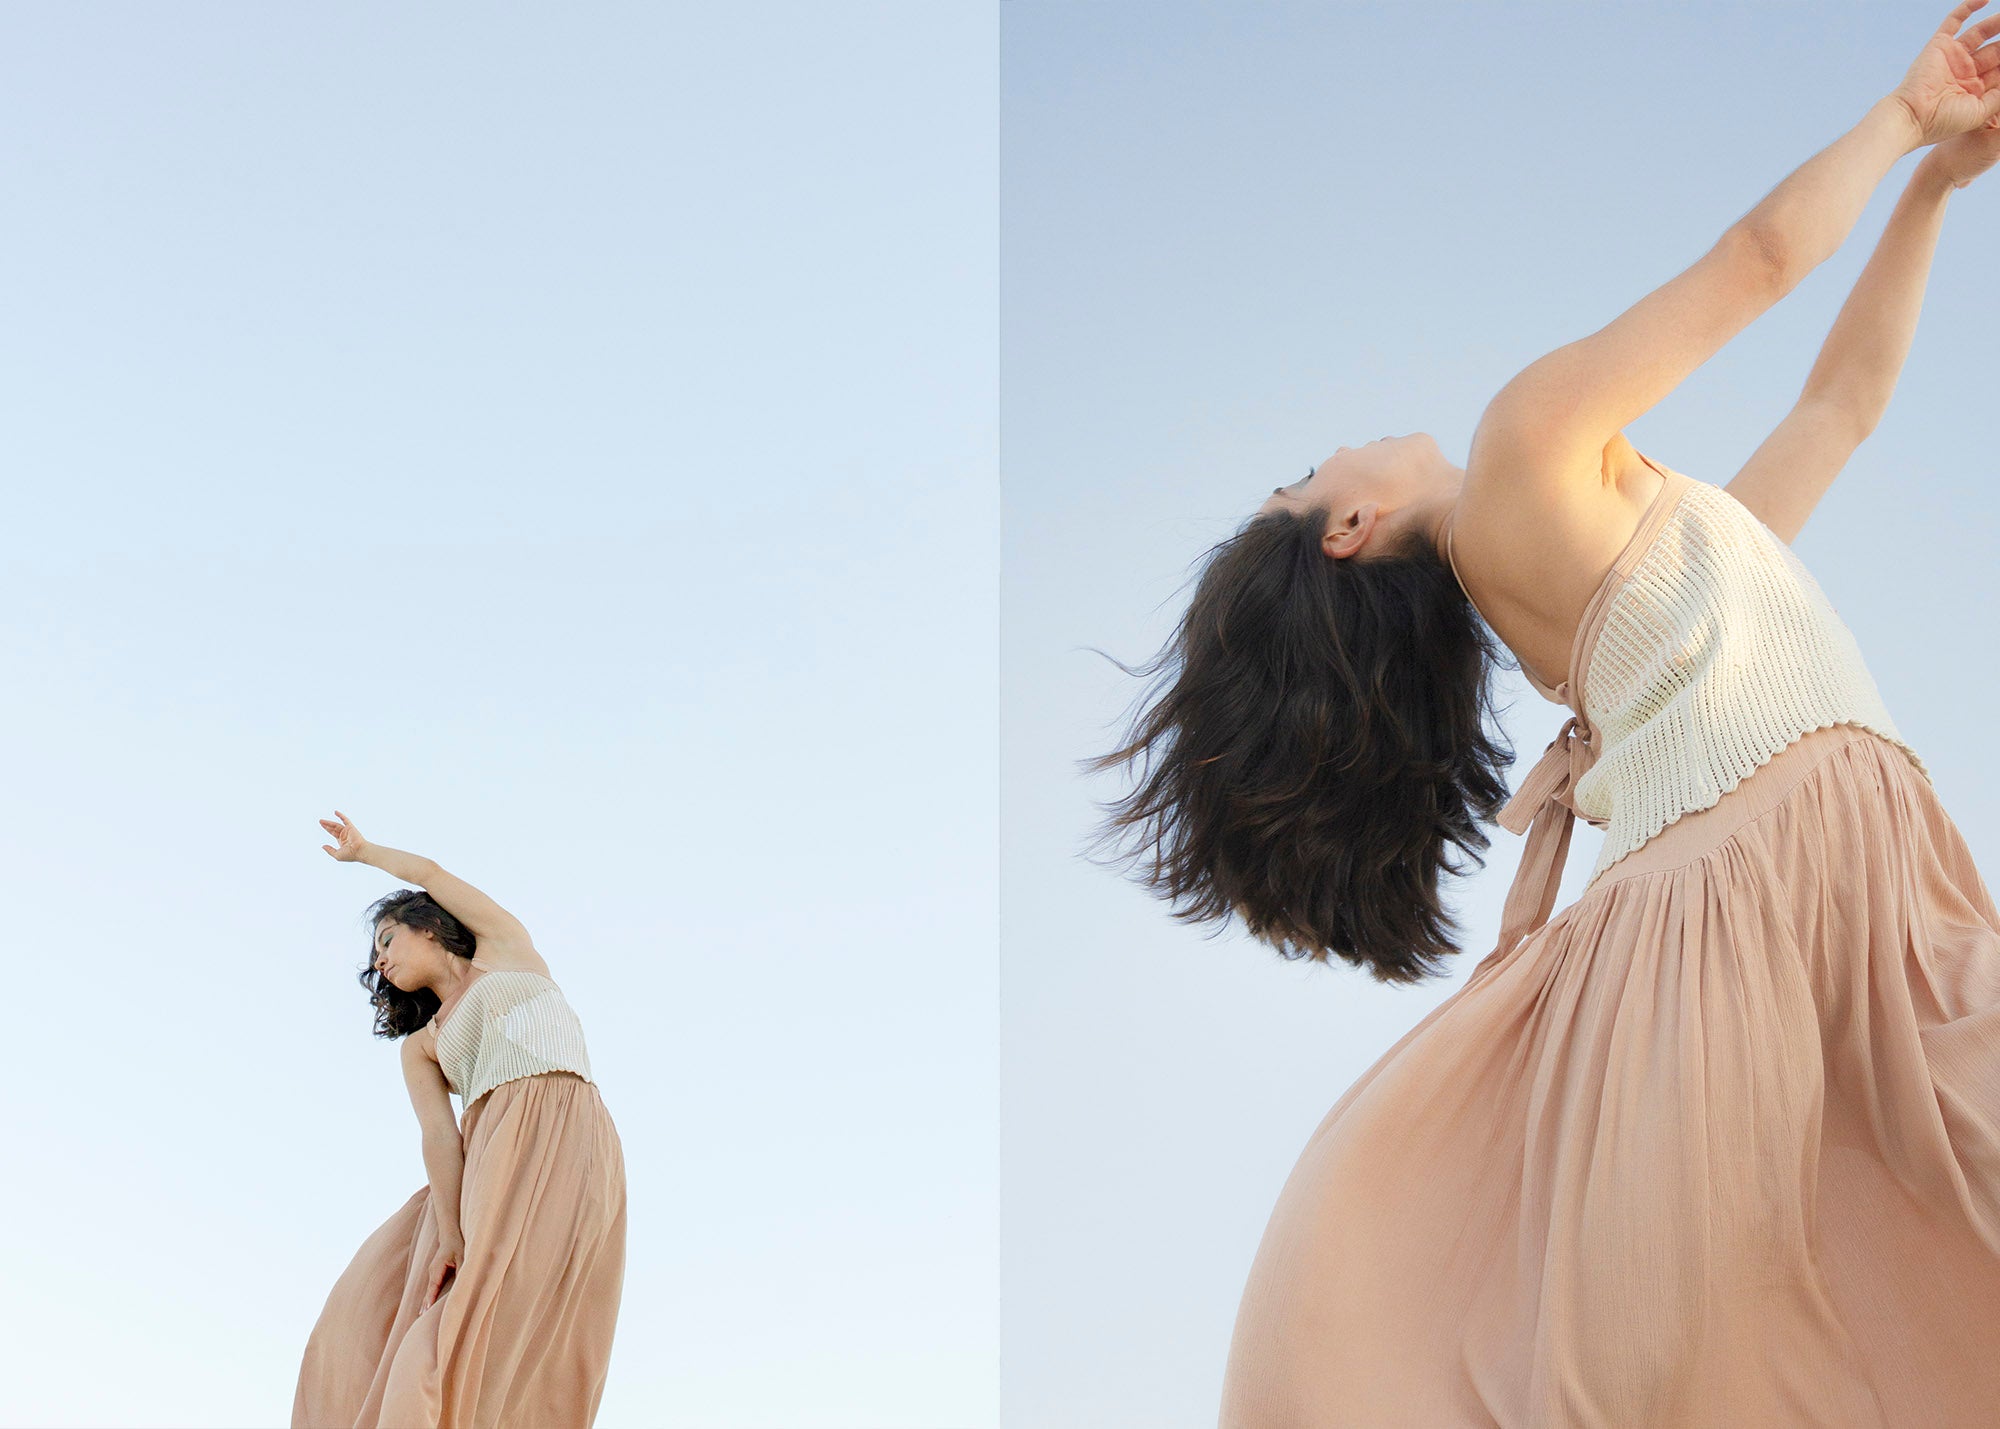 woman dancing wearing a light tan naturally dyed and handwoven dress in front of a blue sky